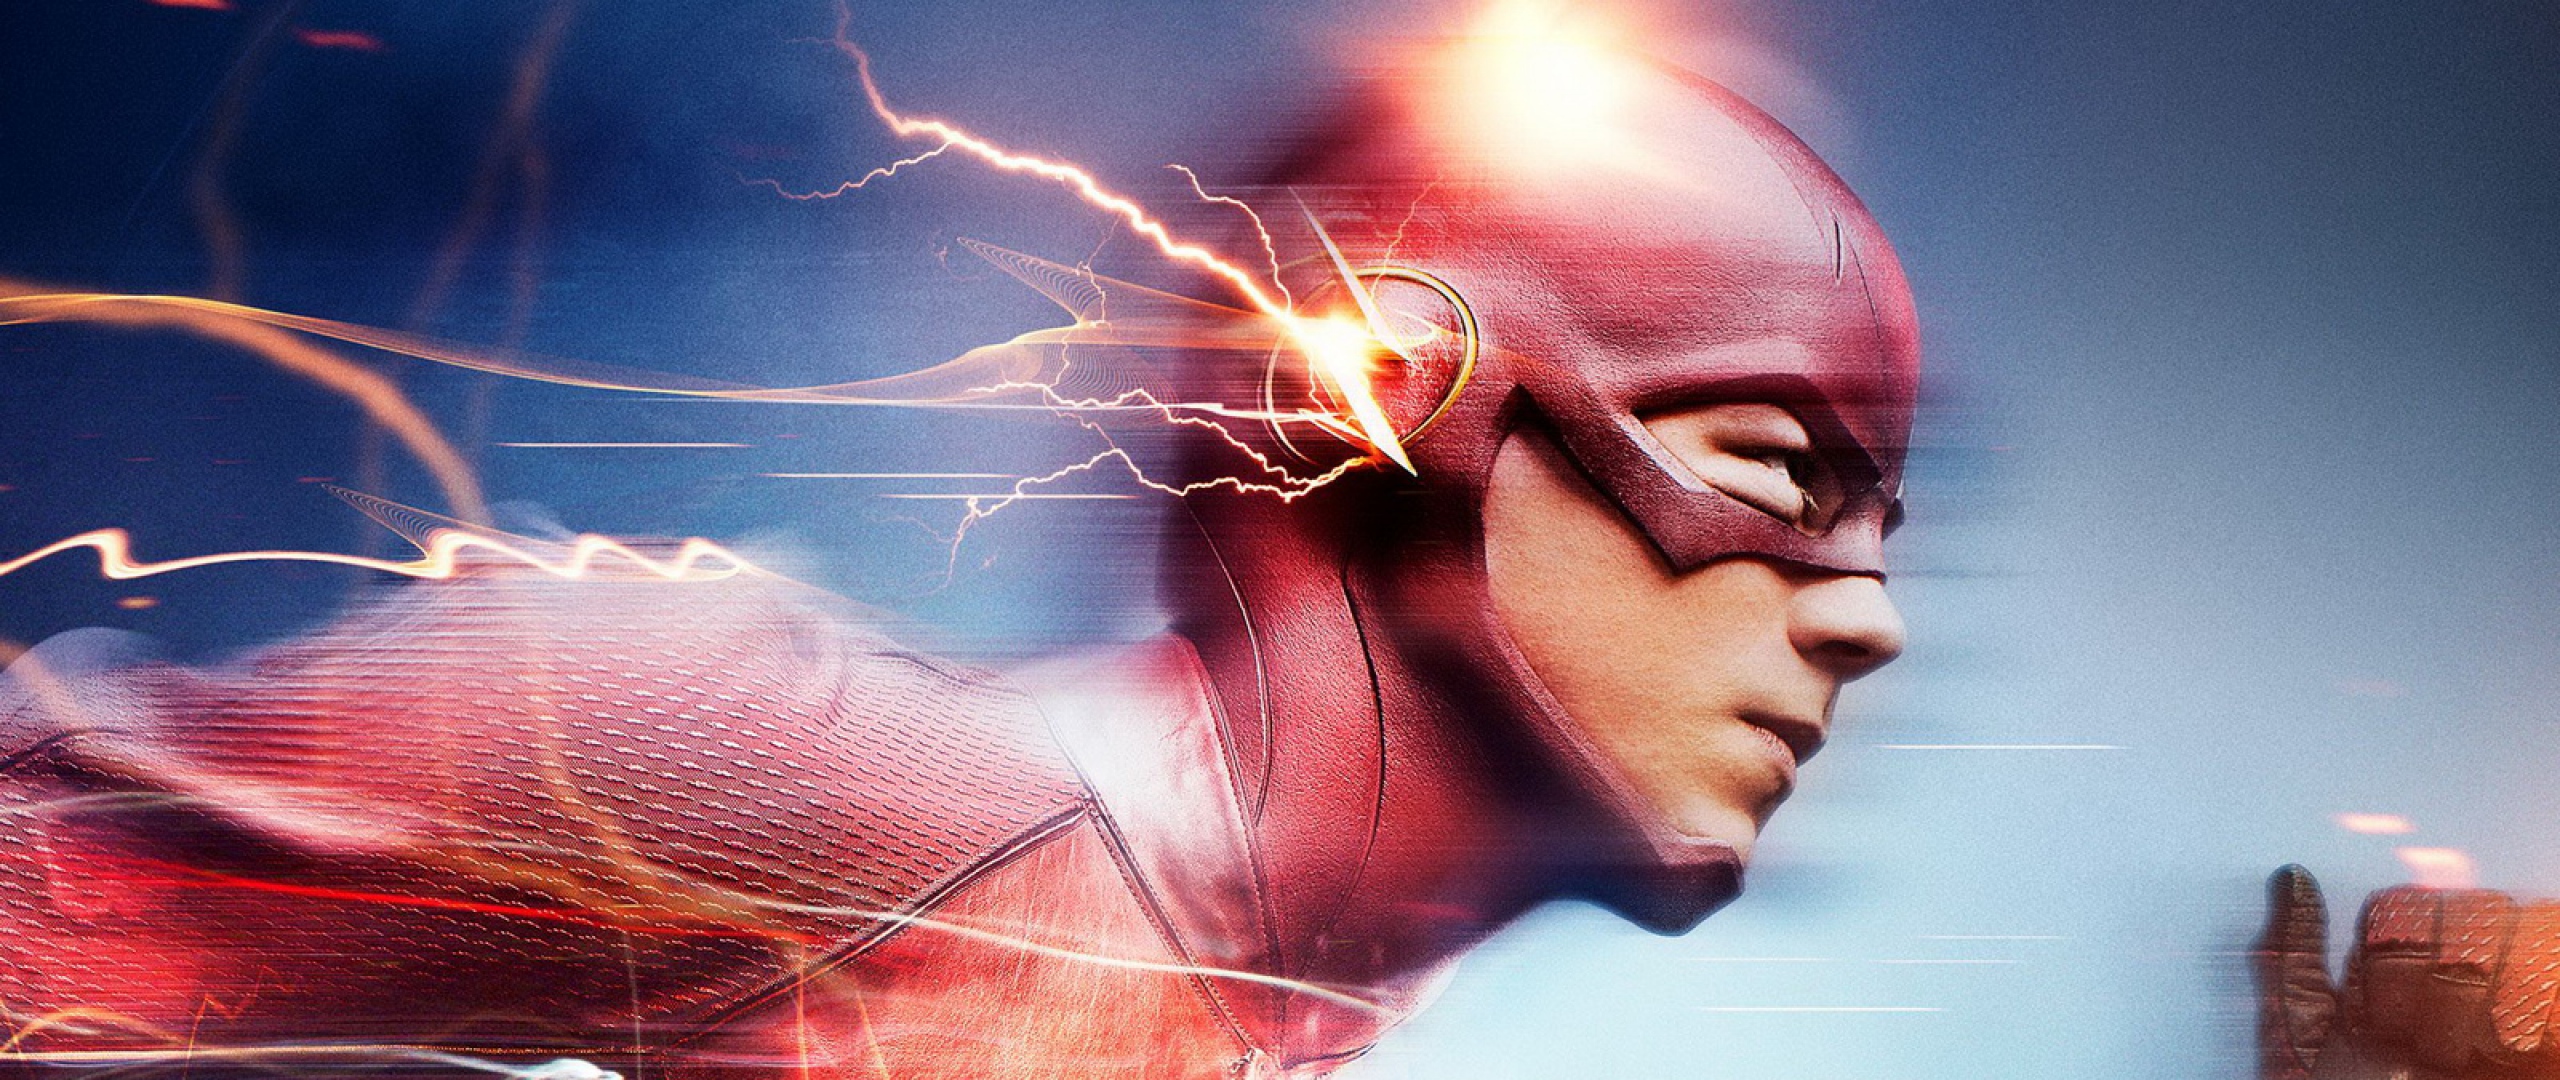 The Flash Tv Wallpaper High Resolution And Quality